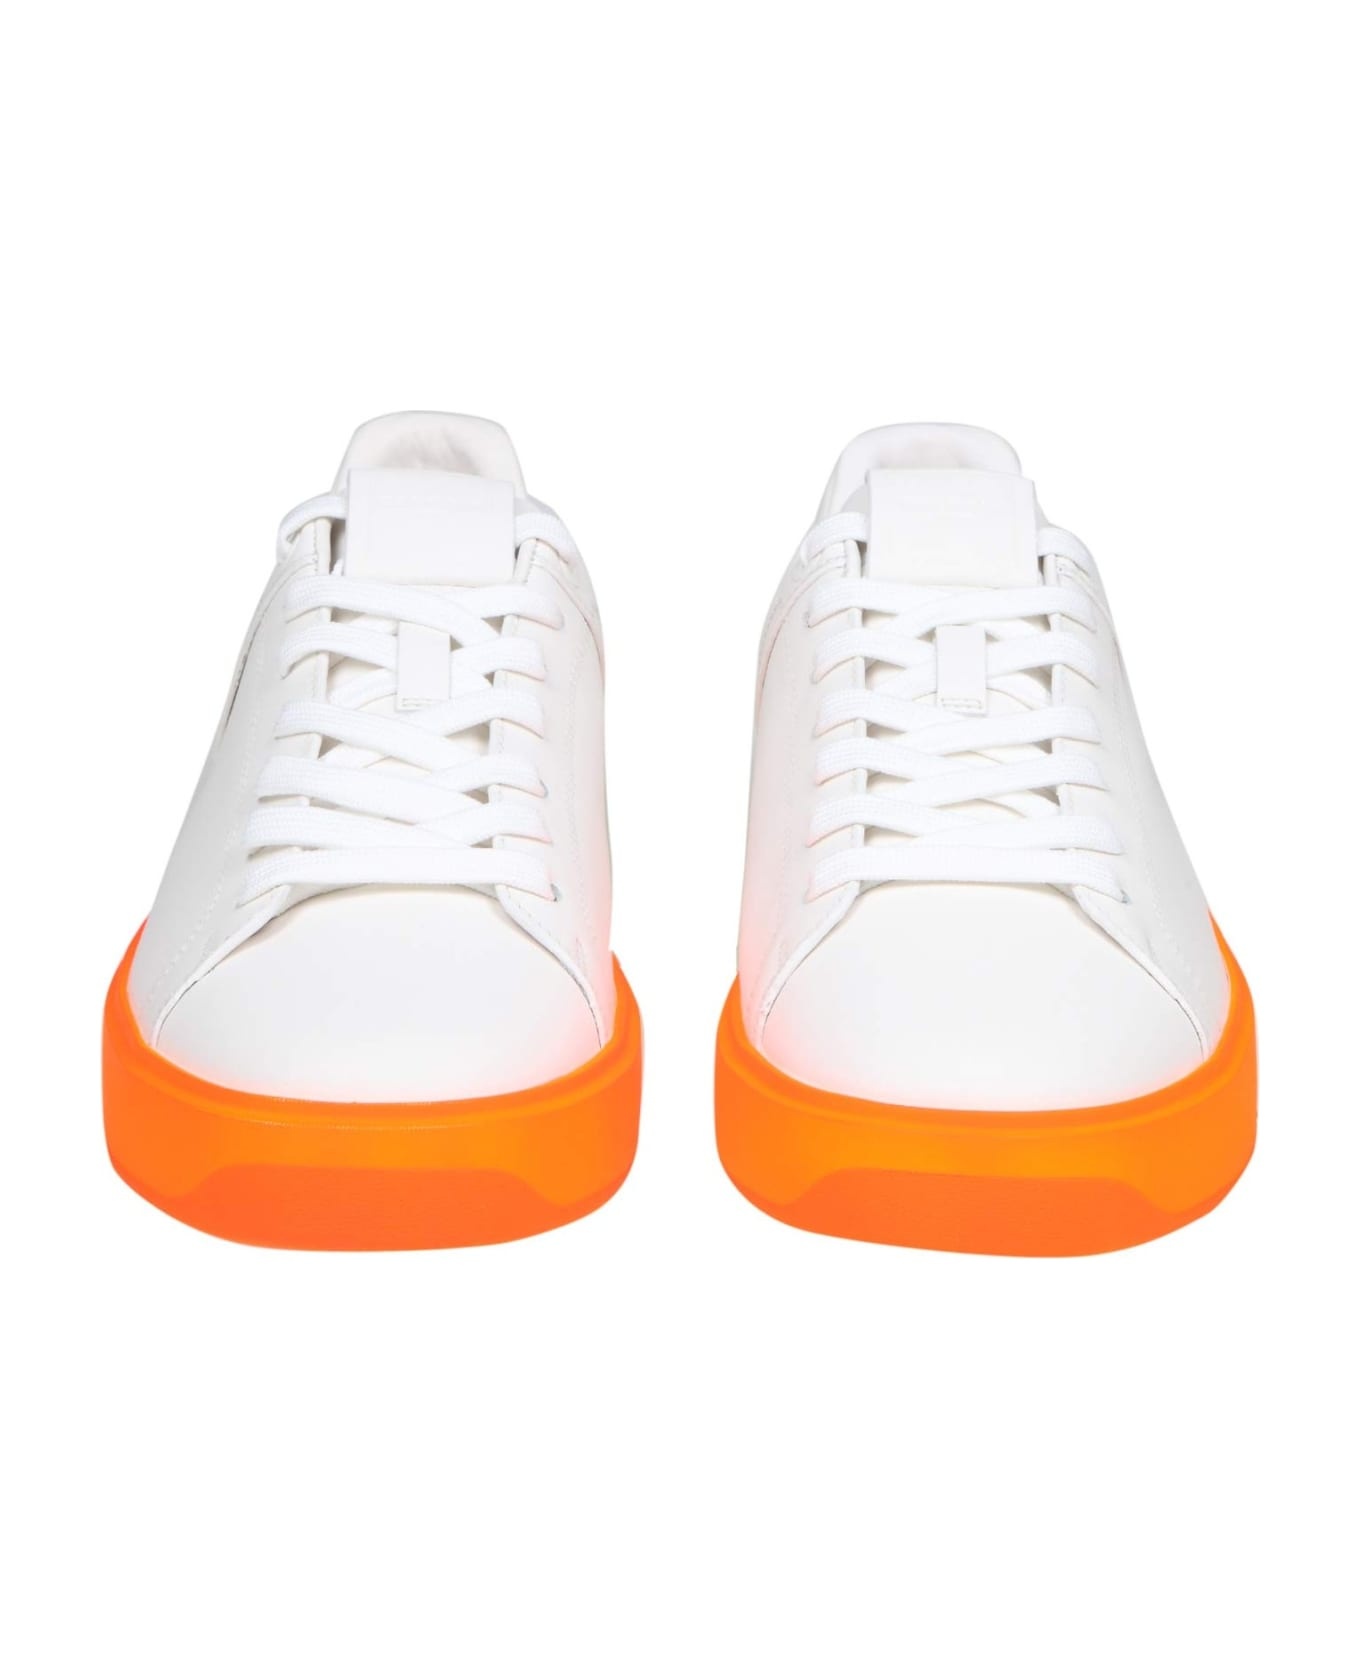 B Court Sneakers In White Leather With Two-tone Sole - 3